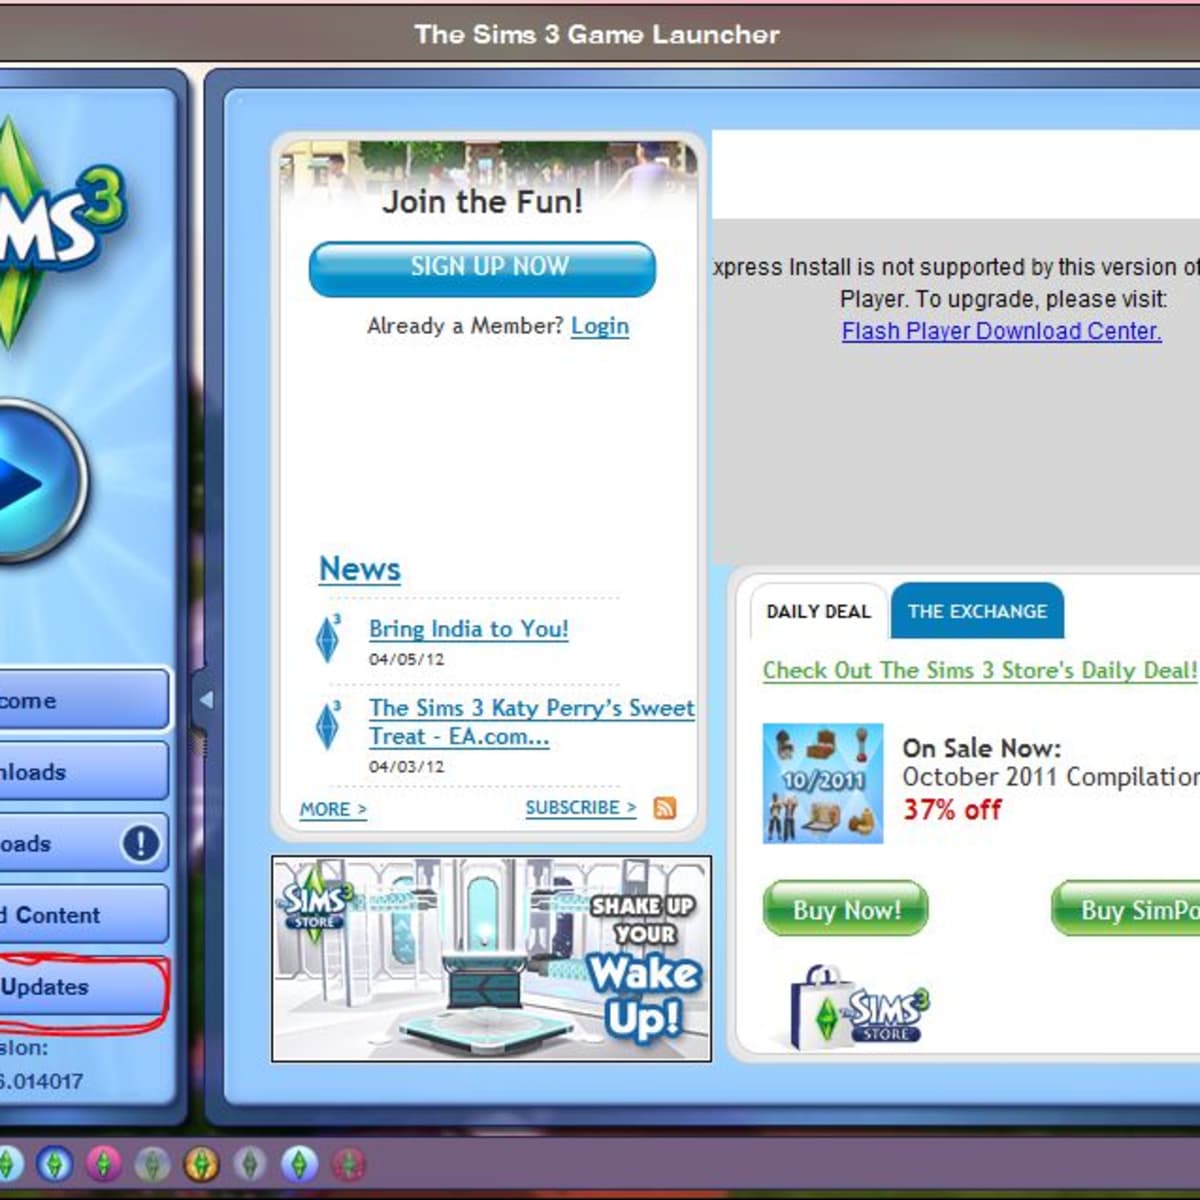 how to download custom content for sims 4 mac